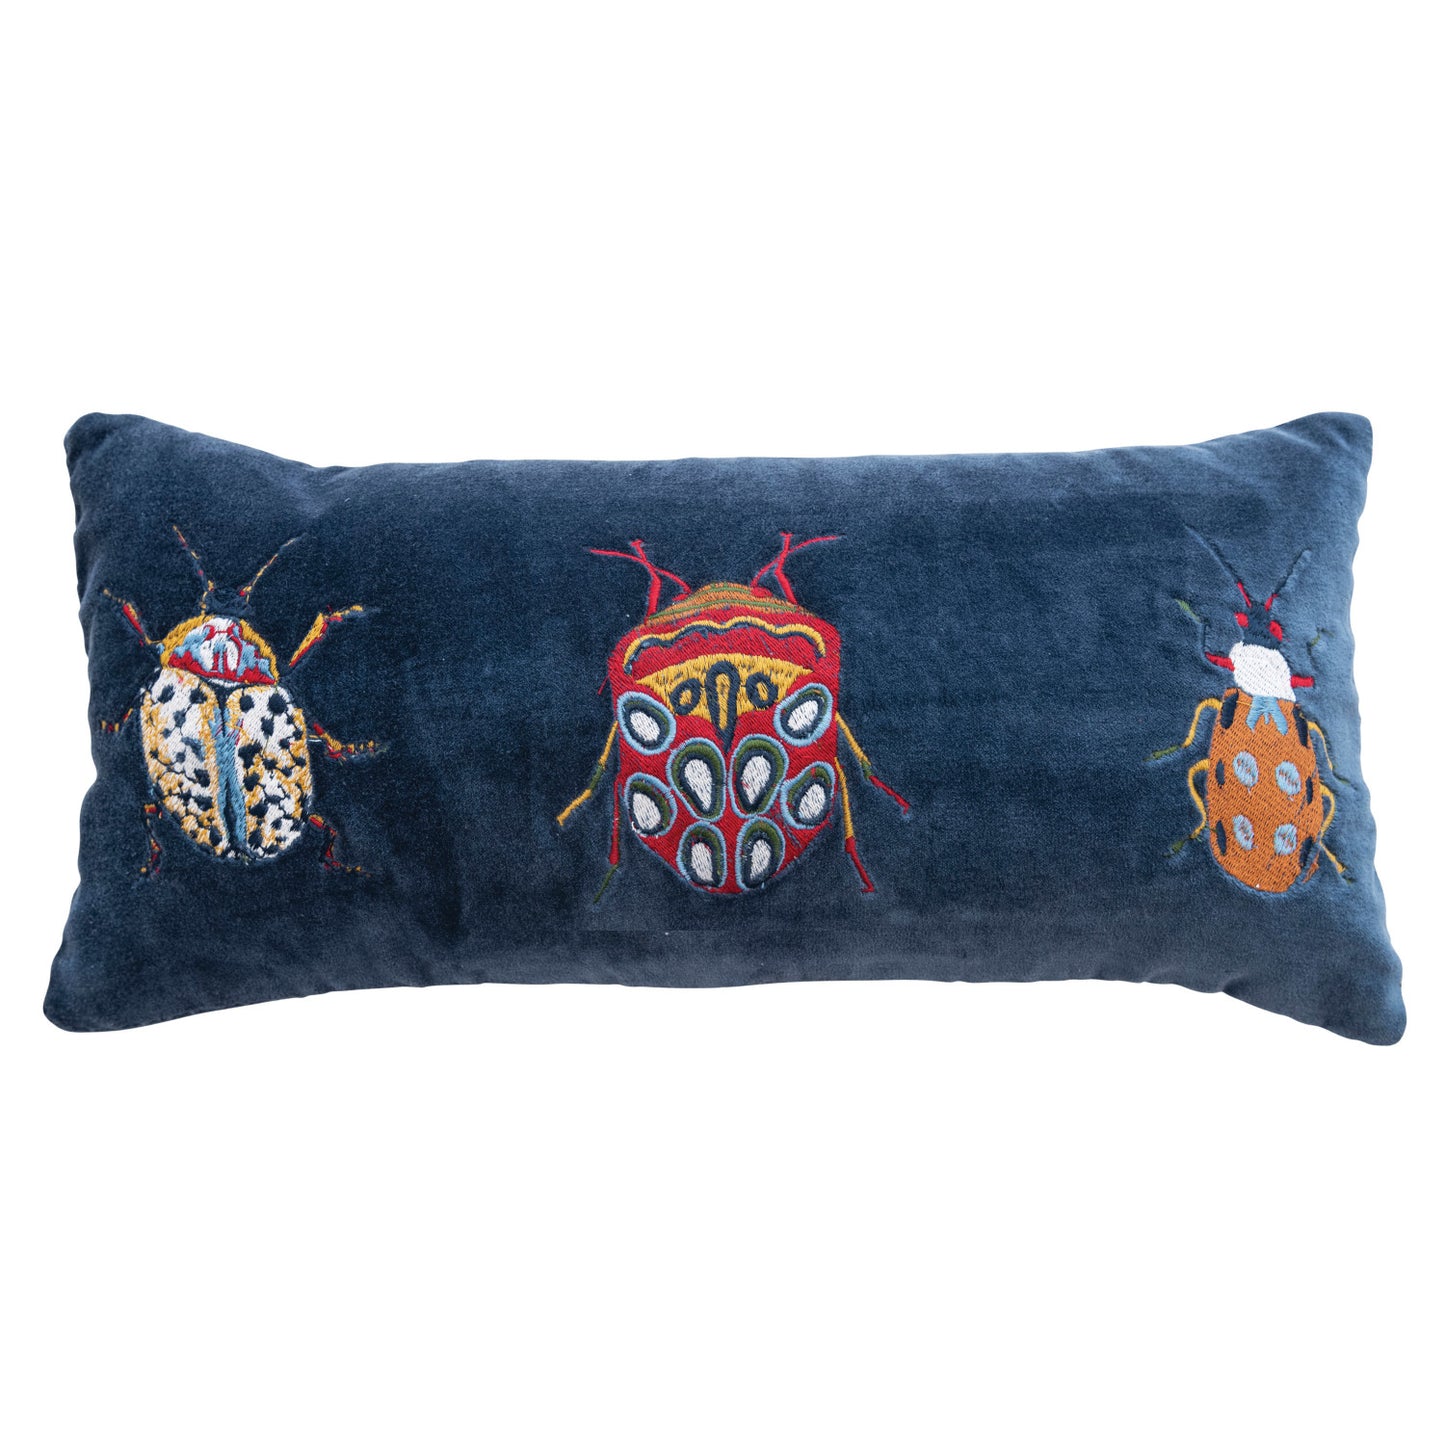 Cotton Velvet Embroidered Lumbar Pillow w/ Beetles &amp; Chambray Back, Multi Color